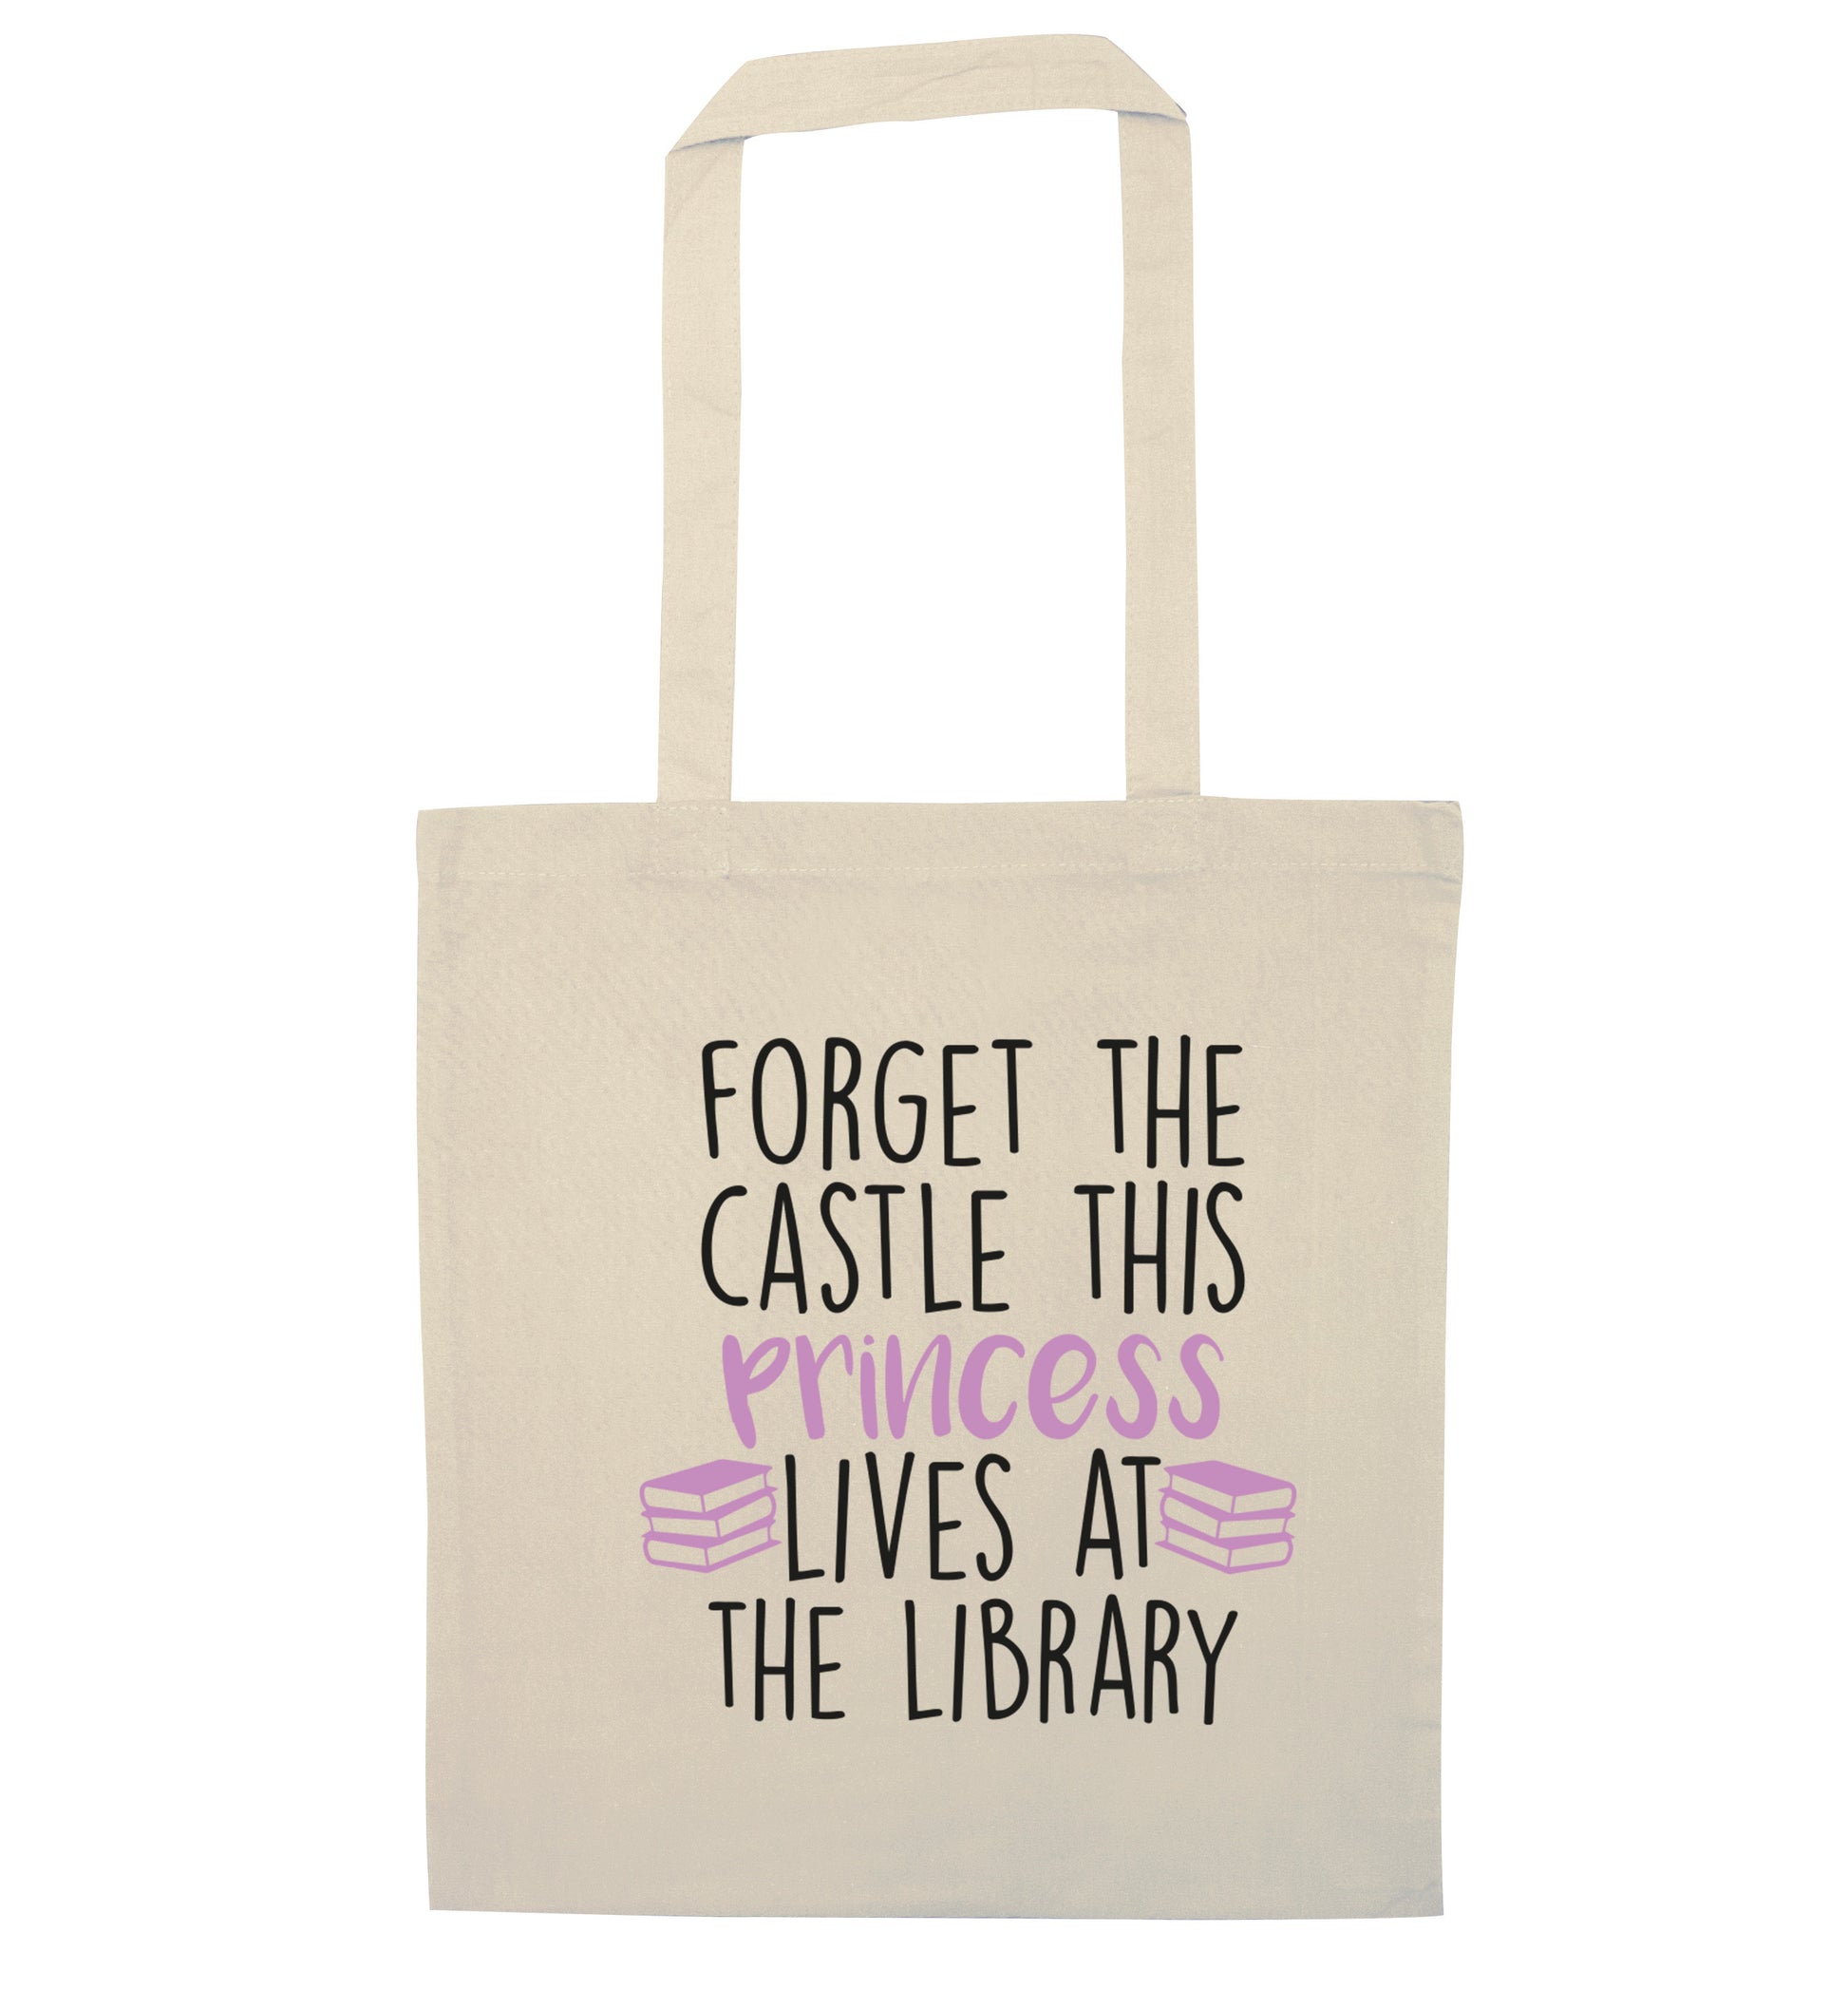 Forget the castle this princess lives at the library natural tote bag